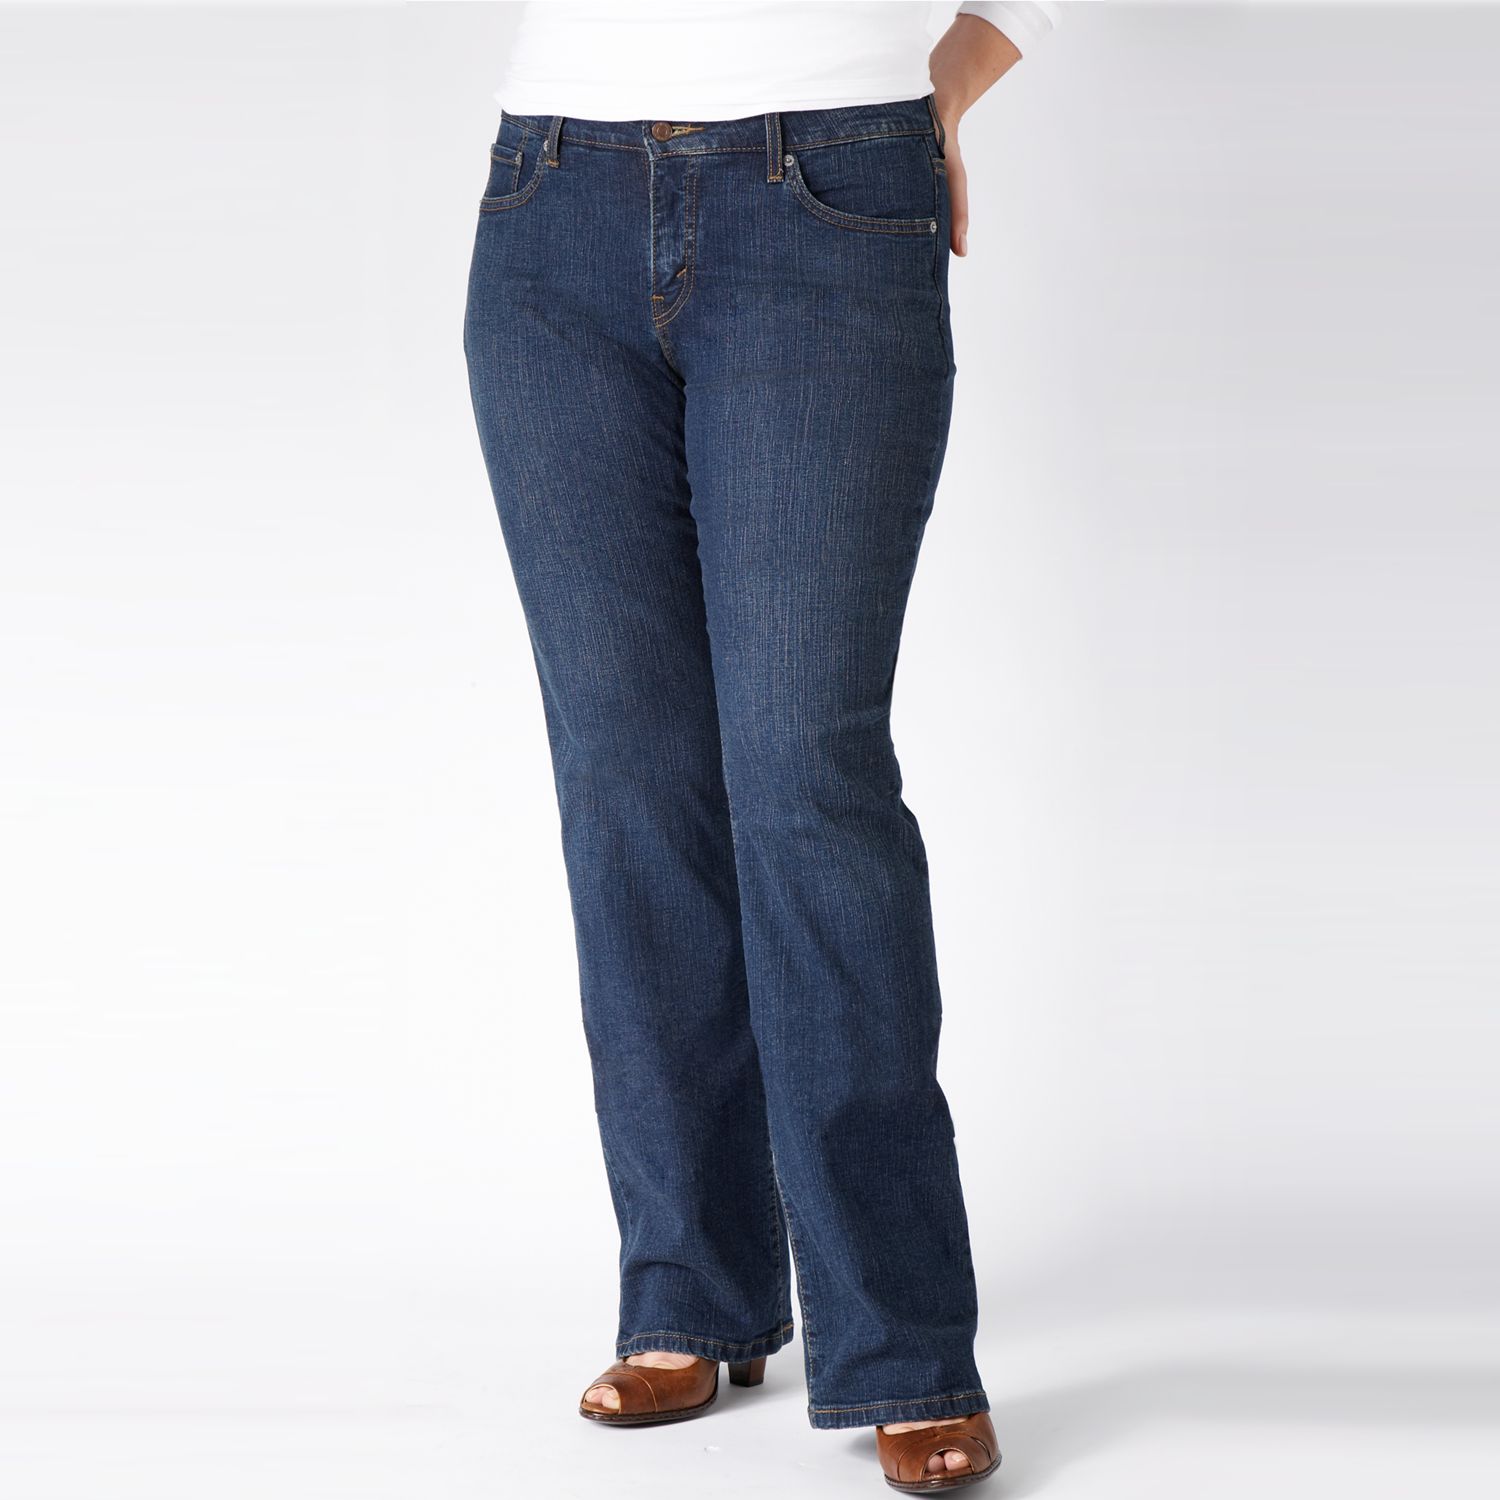 levi's perfectly slimming bootcut 512 jeans